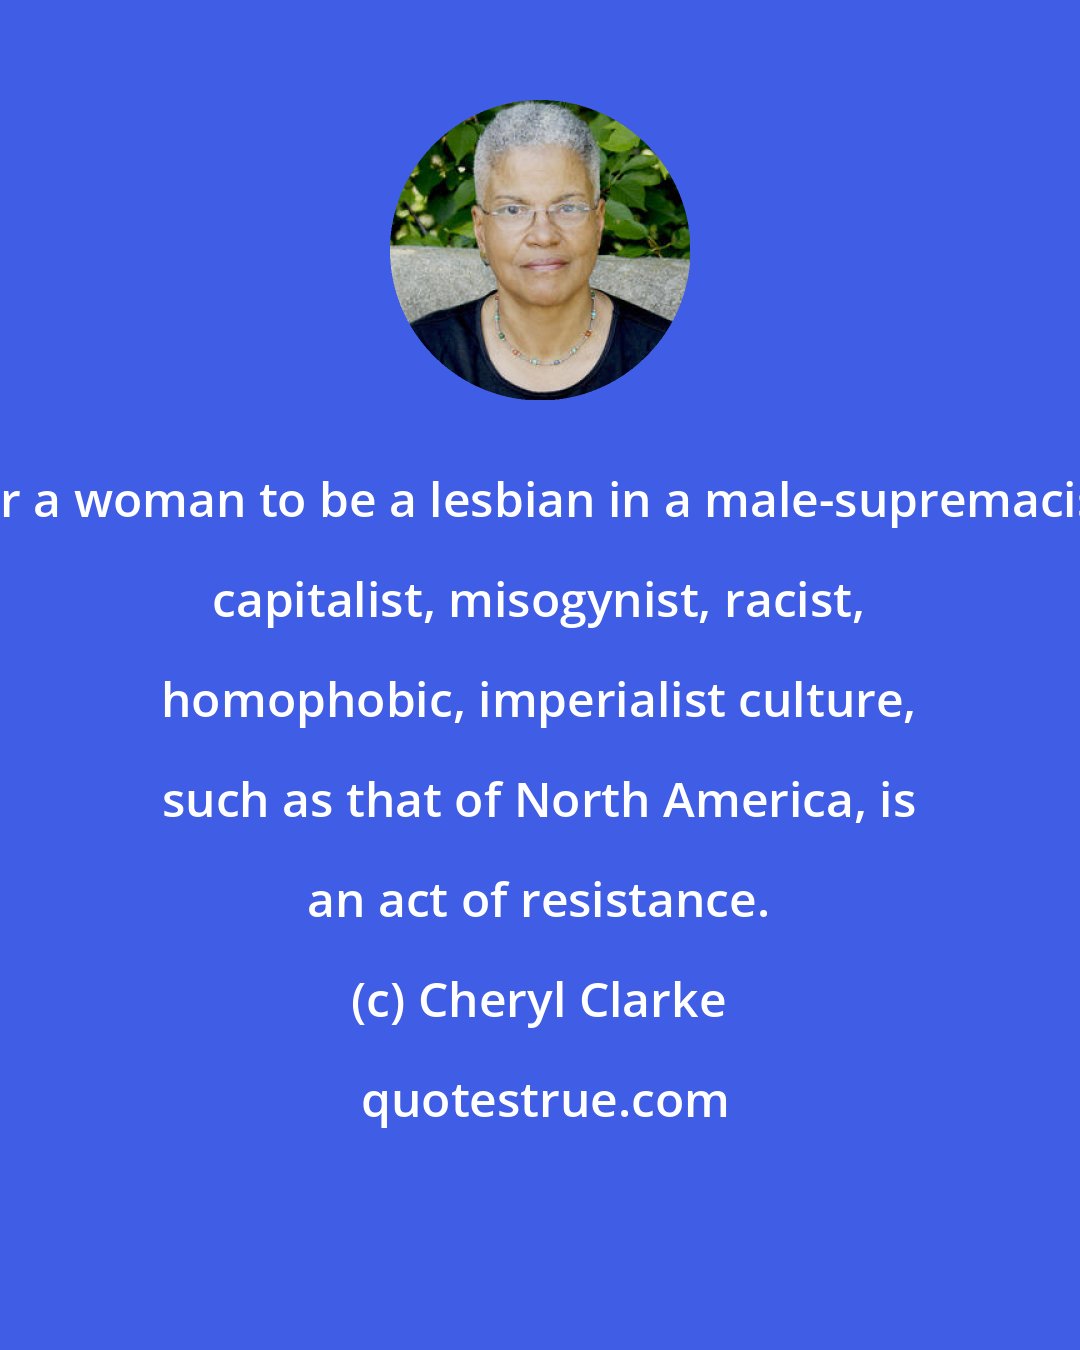 Cheryl Clarke: For a woman to be a lesbian in a male-supremacist, capitalist, misogynist, racist, homophobic, imperialist culture, such as that of North America, is an act of resistance.